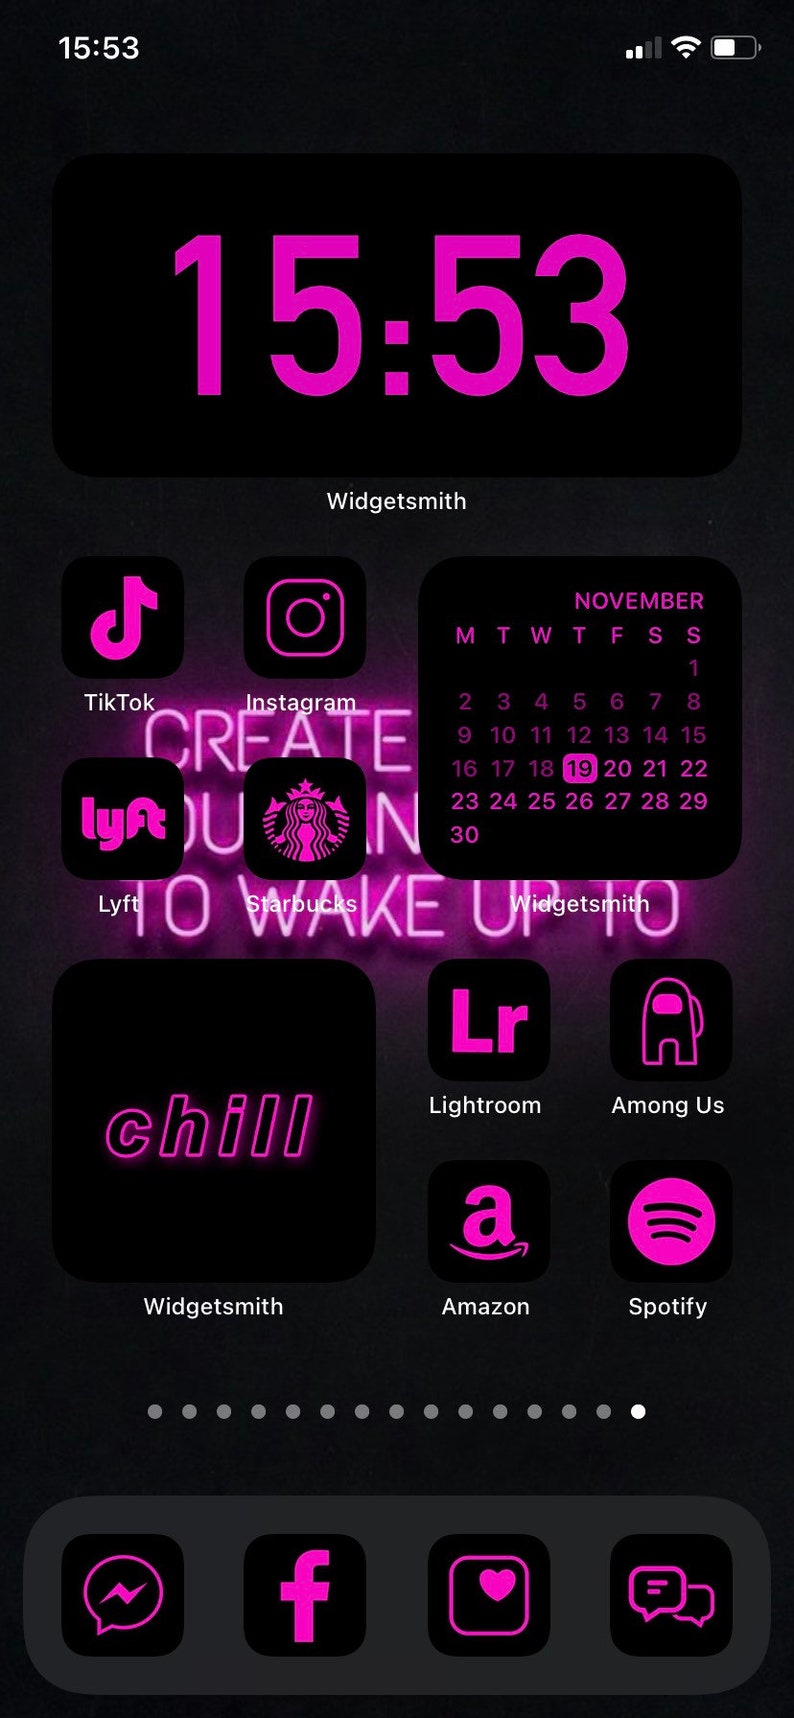 App Icons Neon Pink Black Pink, Aesthetic Home Screen Colorful App Icons, Widgets Neon, iPhone, Android image 8